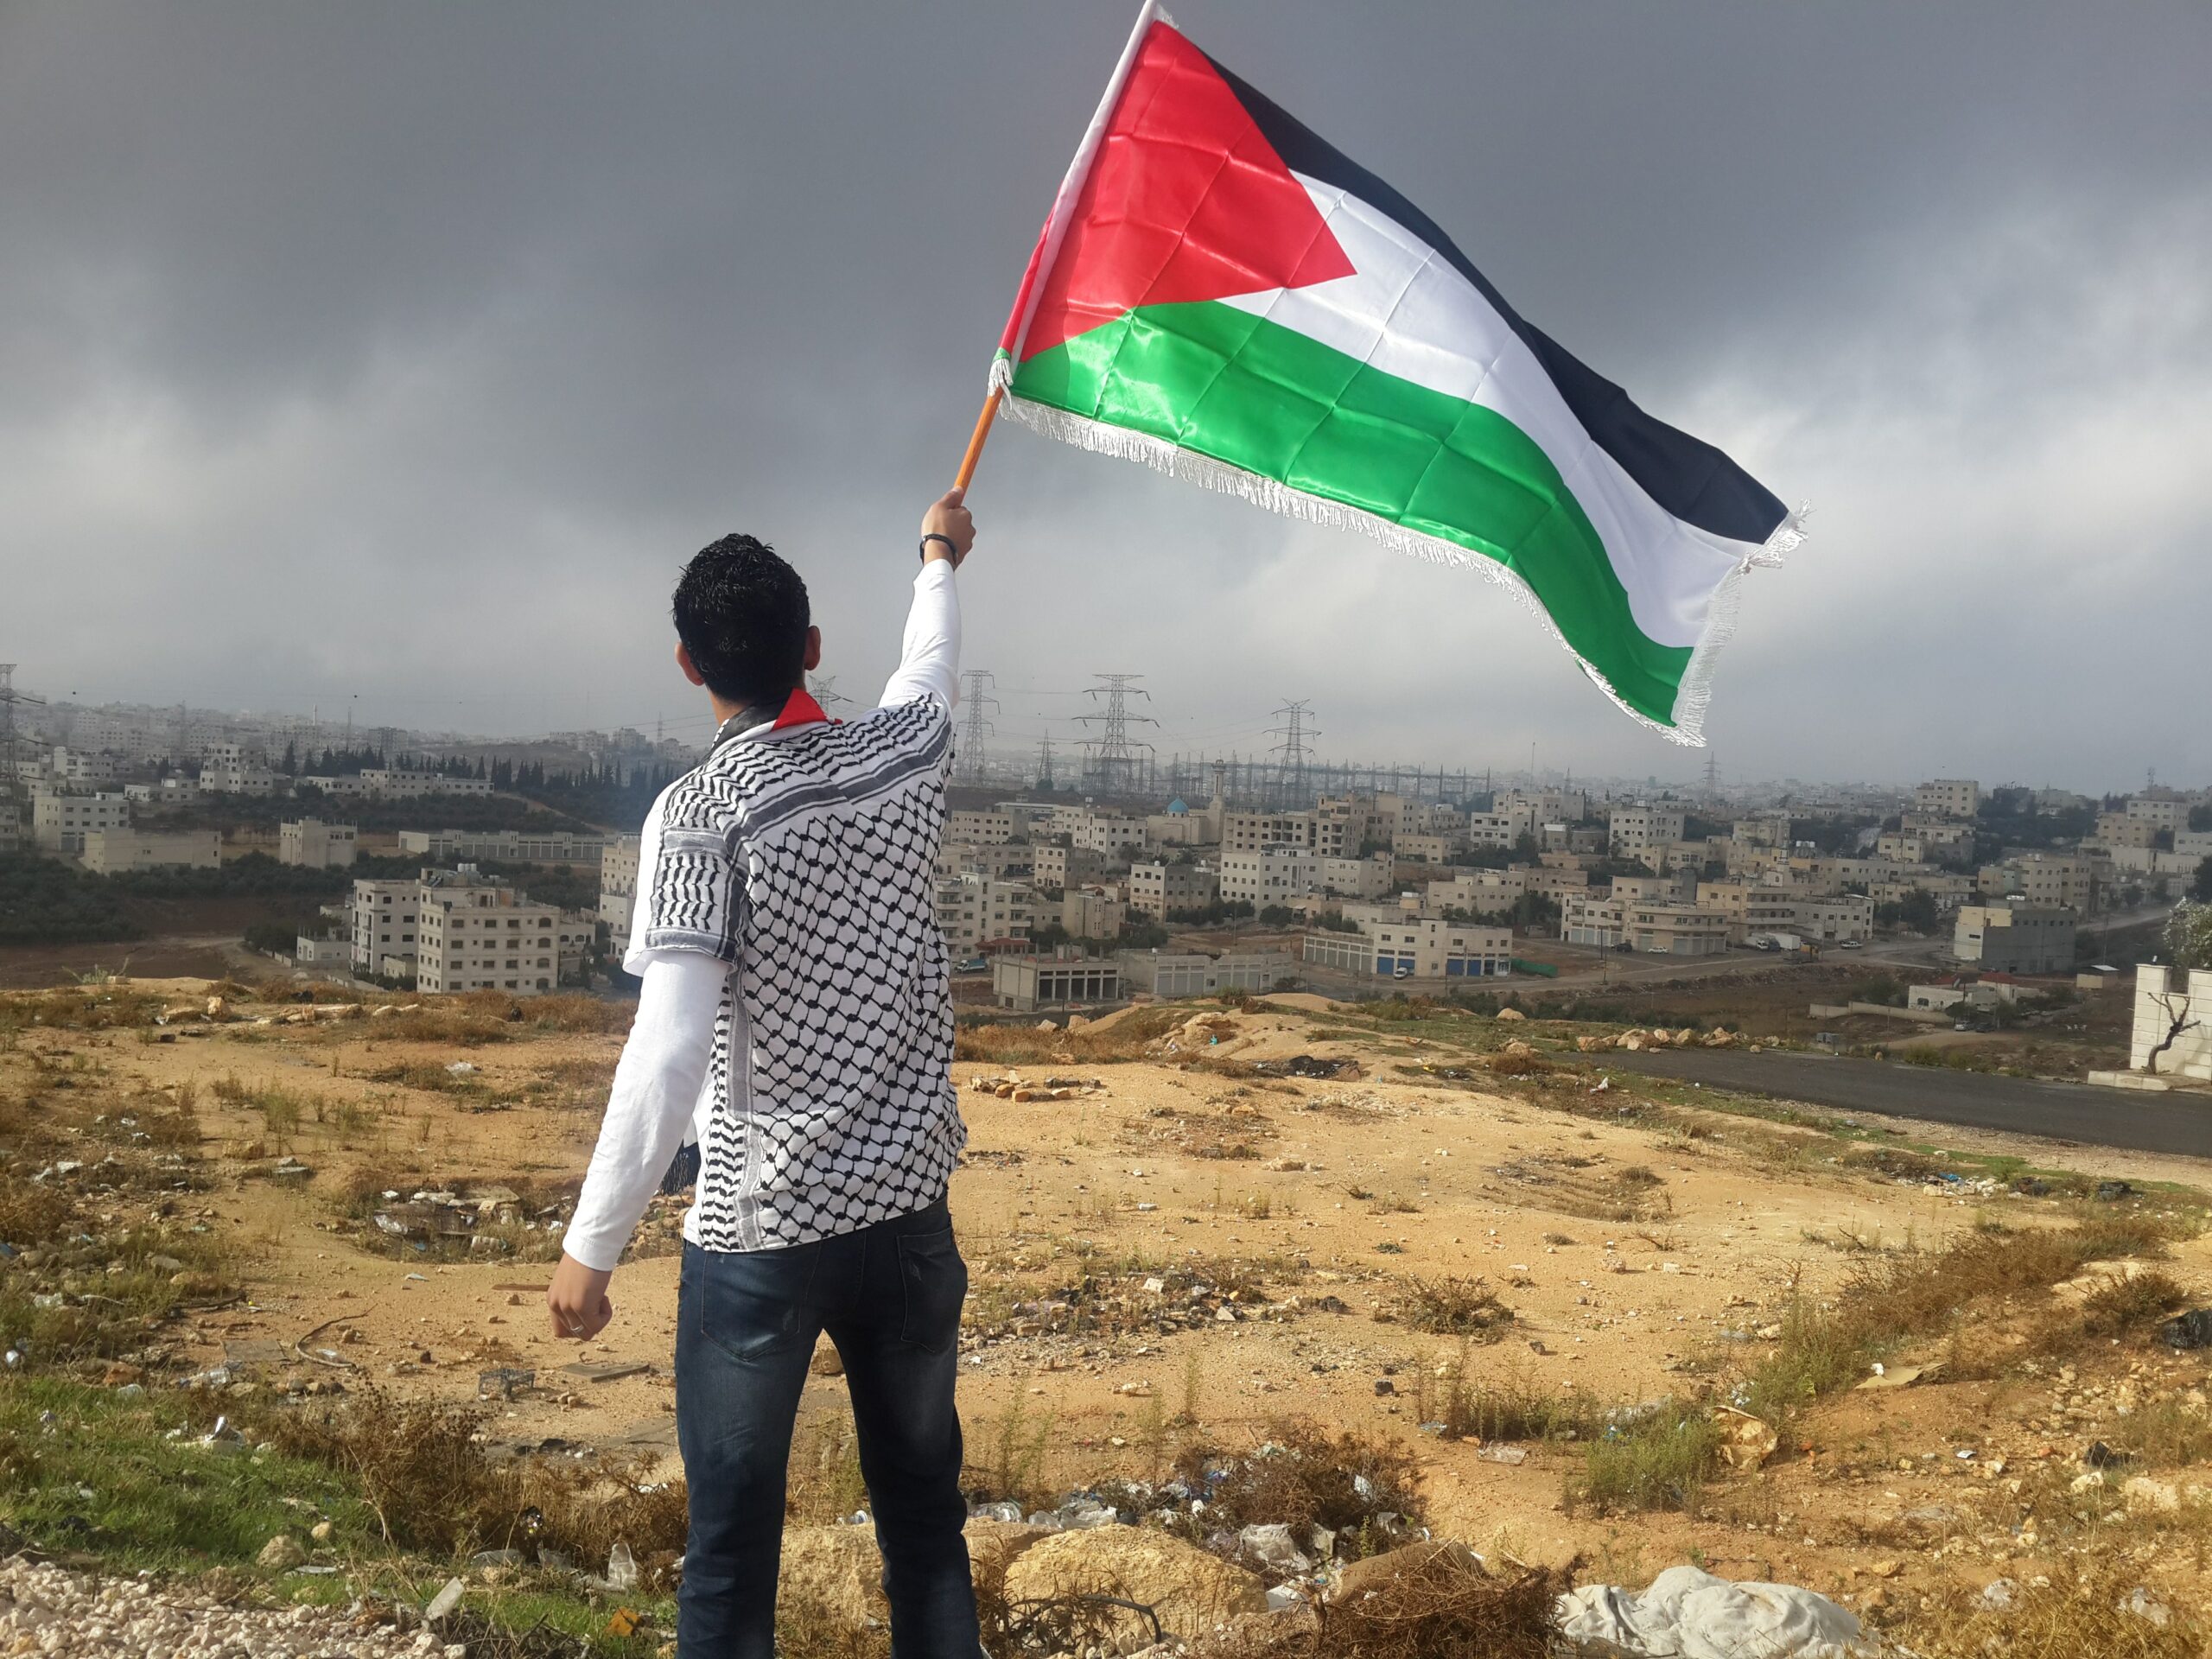 This is a photo of a man standing above a city in Palestine, on a large hill. He is waving a Palestinian flag, red green, and black.